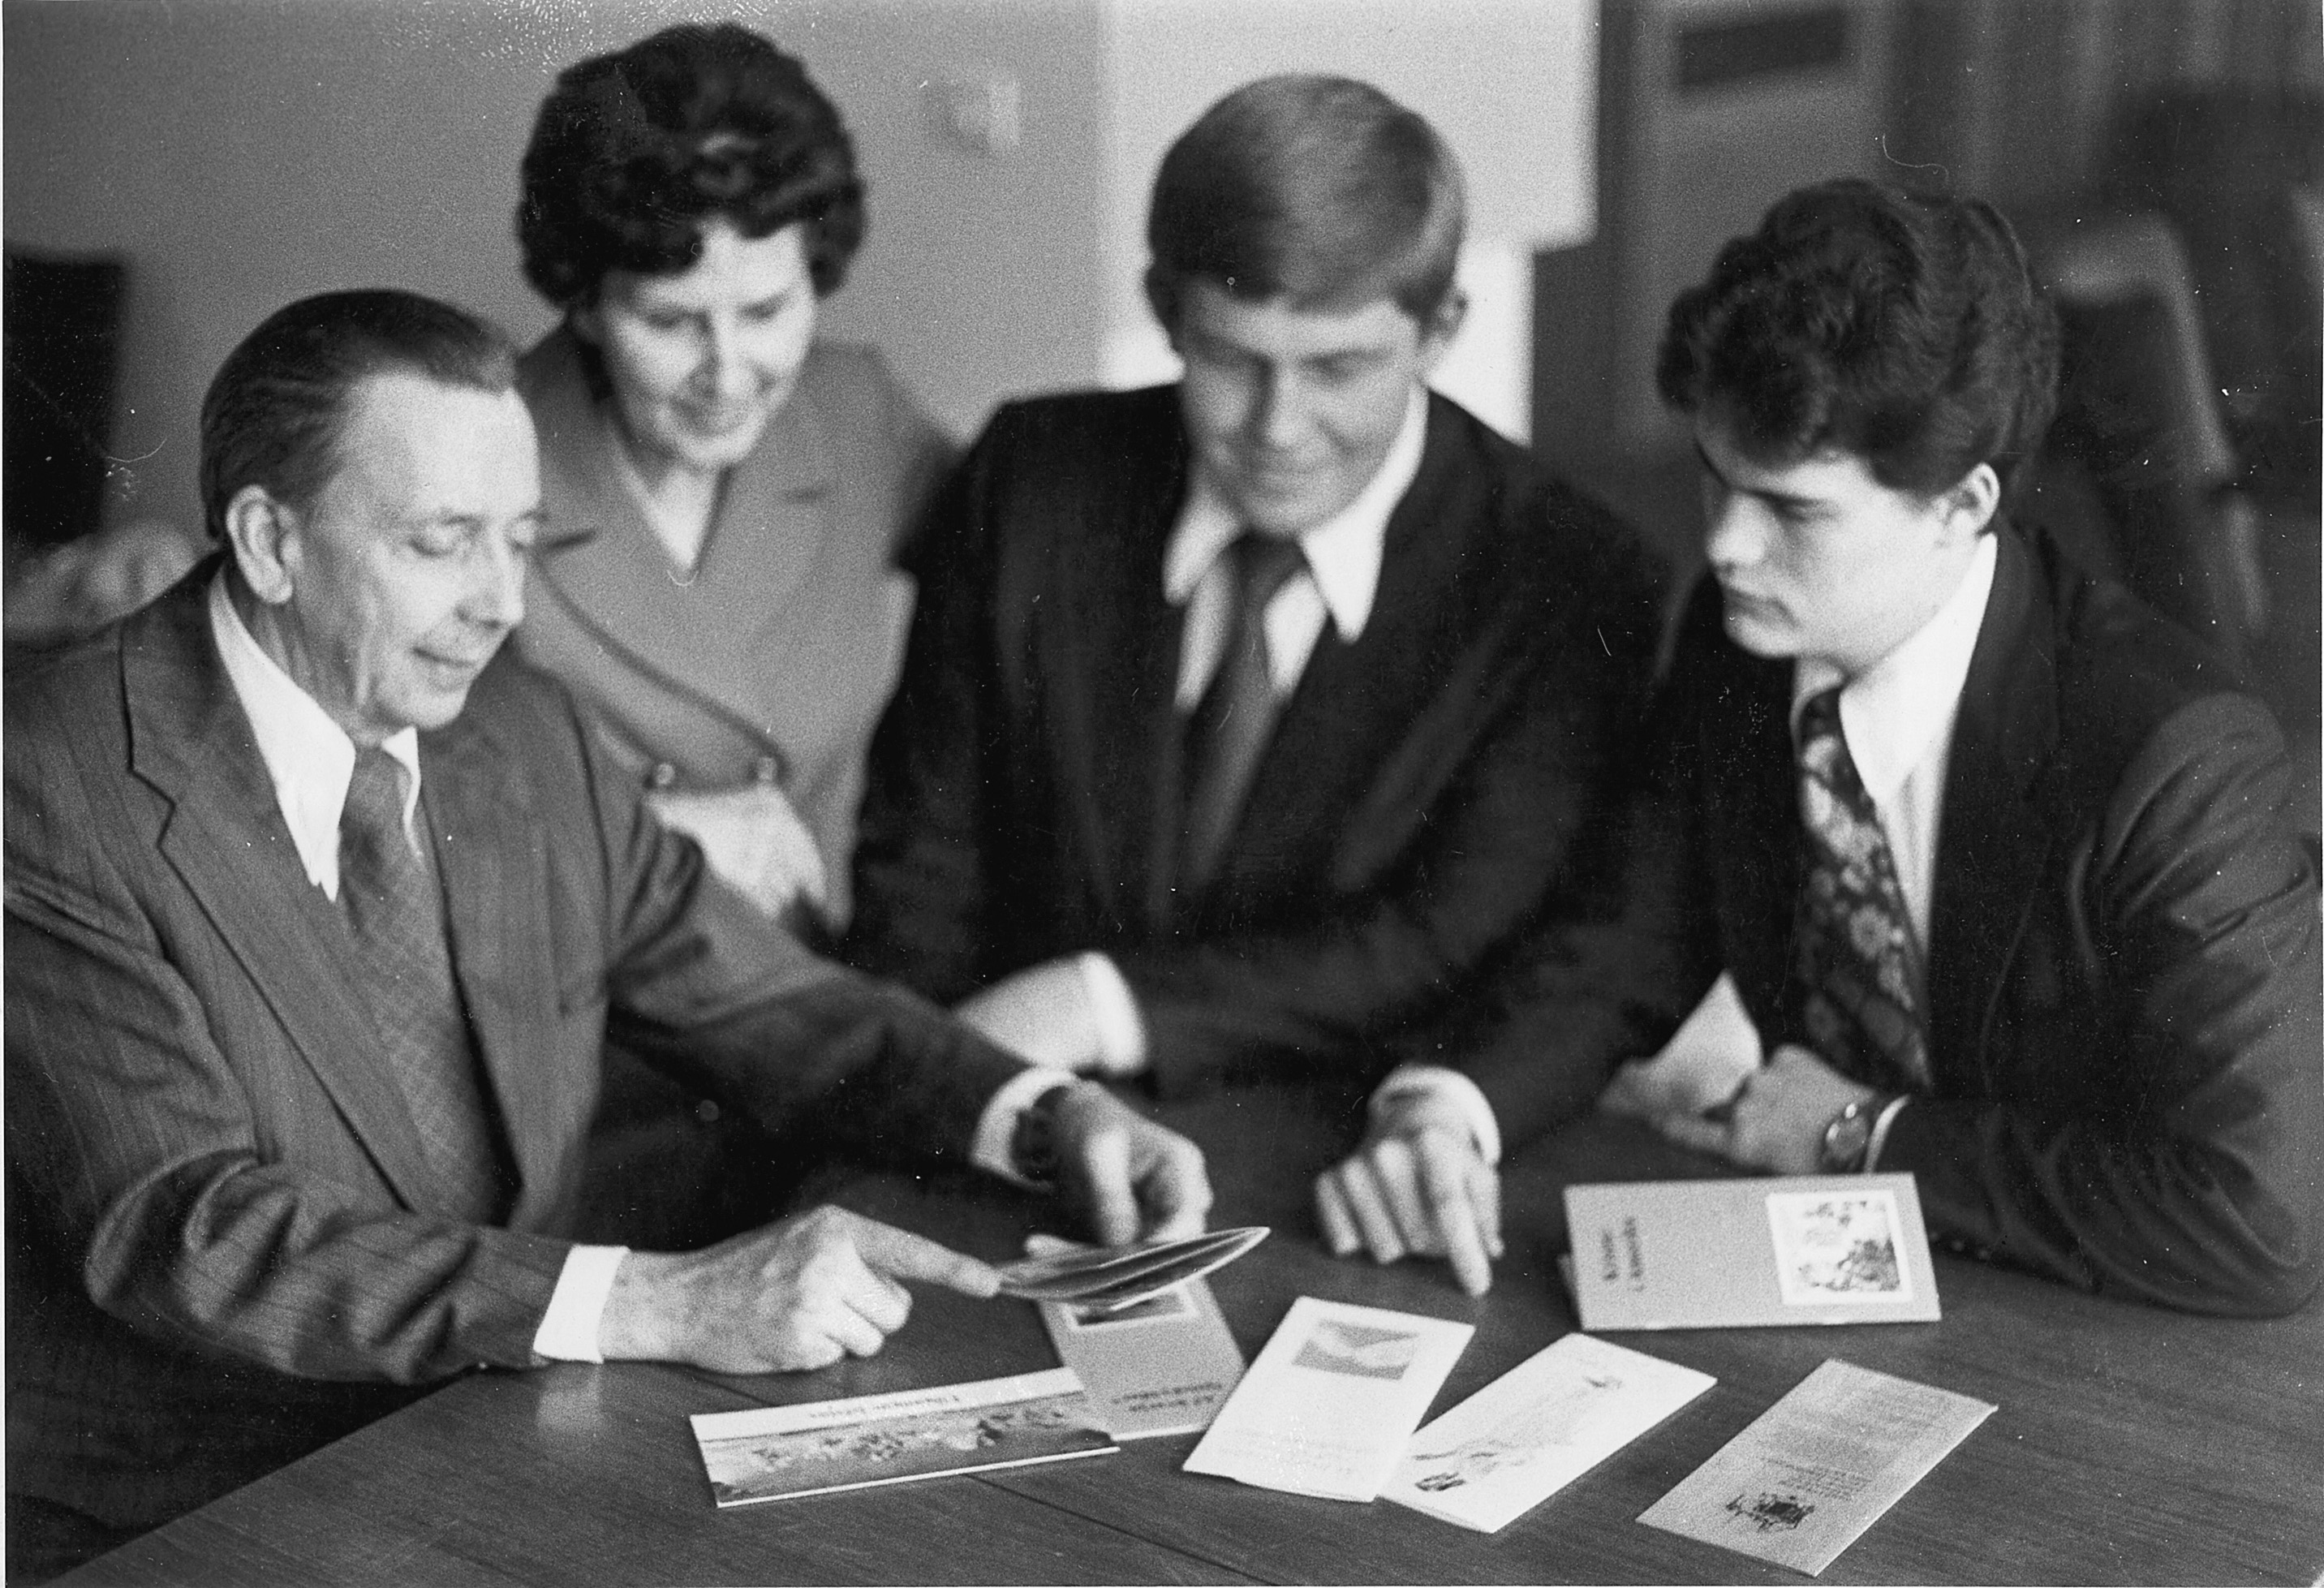 Byron and Melva Geslison, David Dedrickson, and Ty Erickson  look at newly translated Icelandic missionary tracts, 1977.  Courtesy of the Geslison family